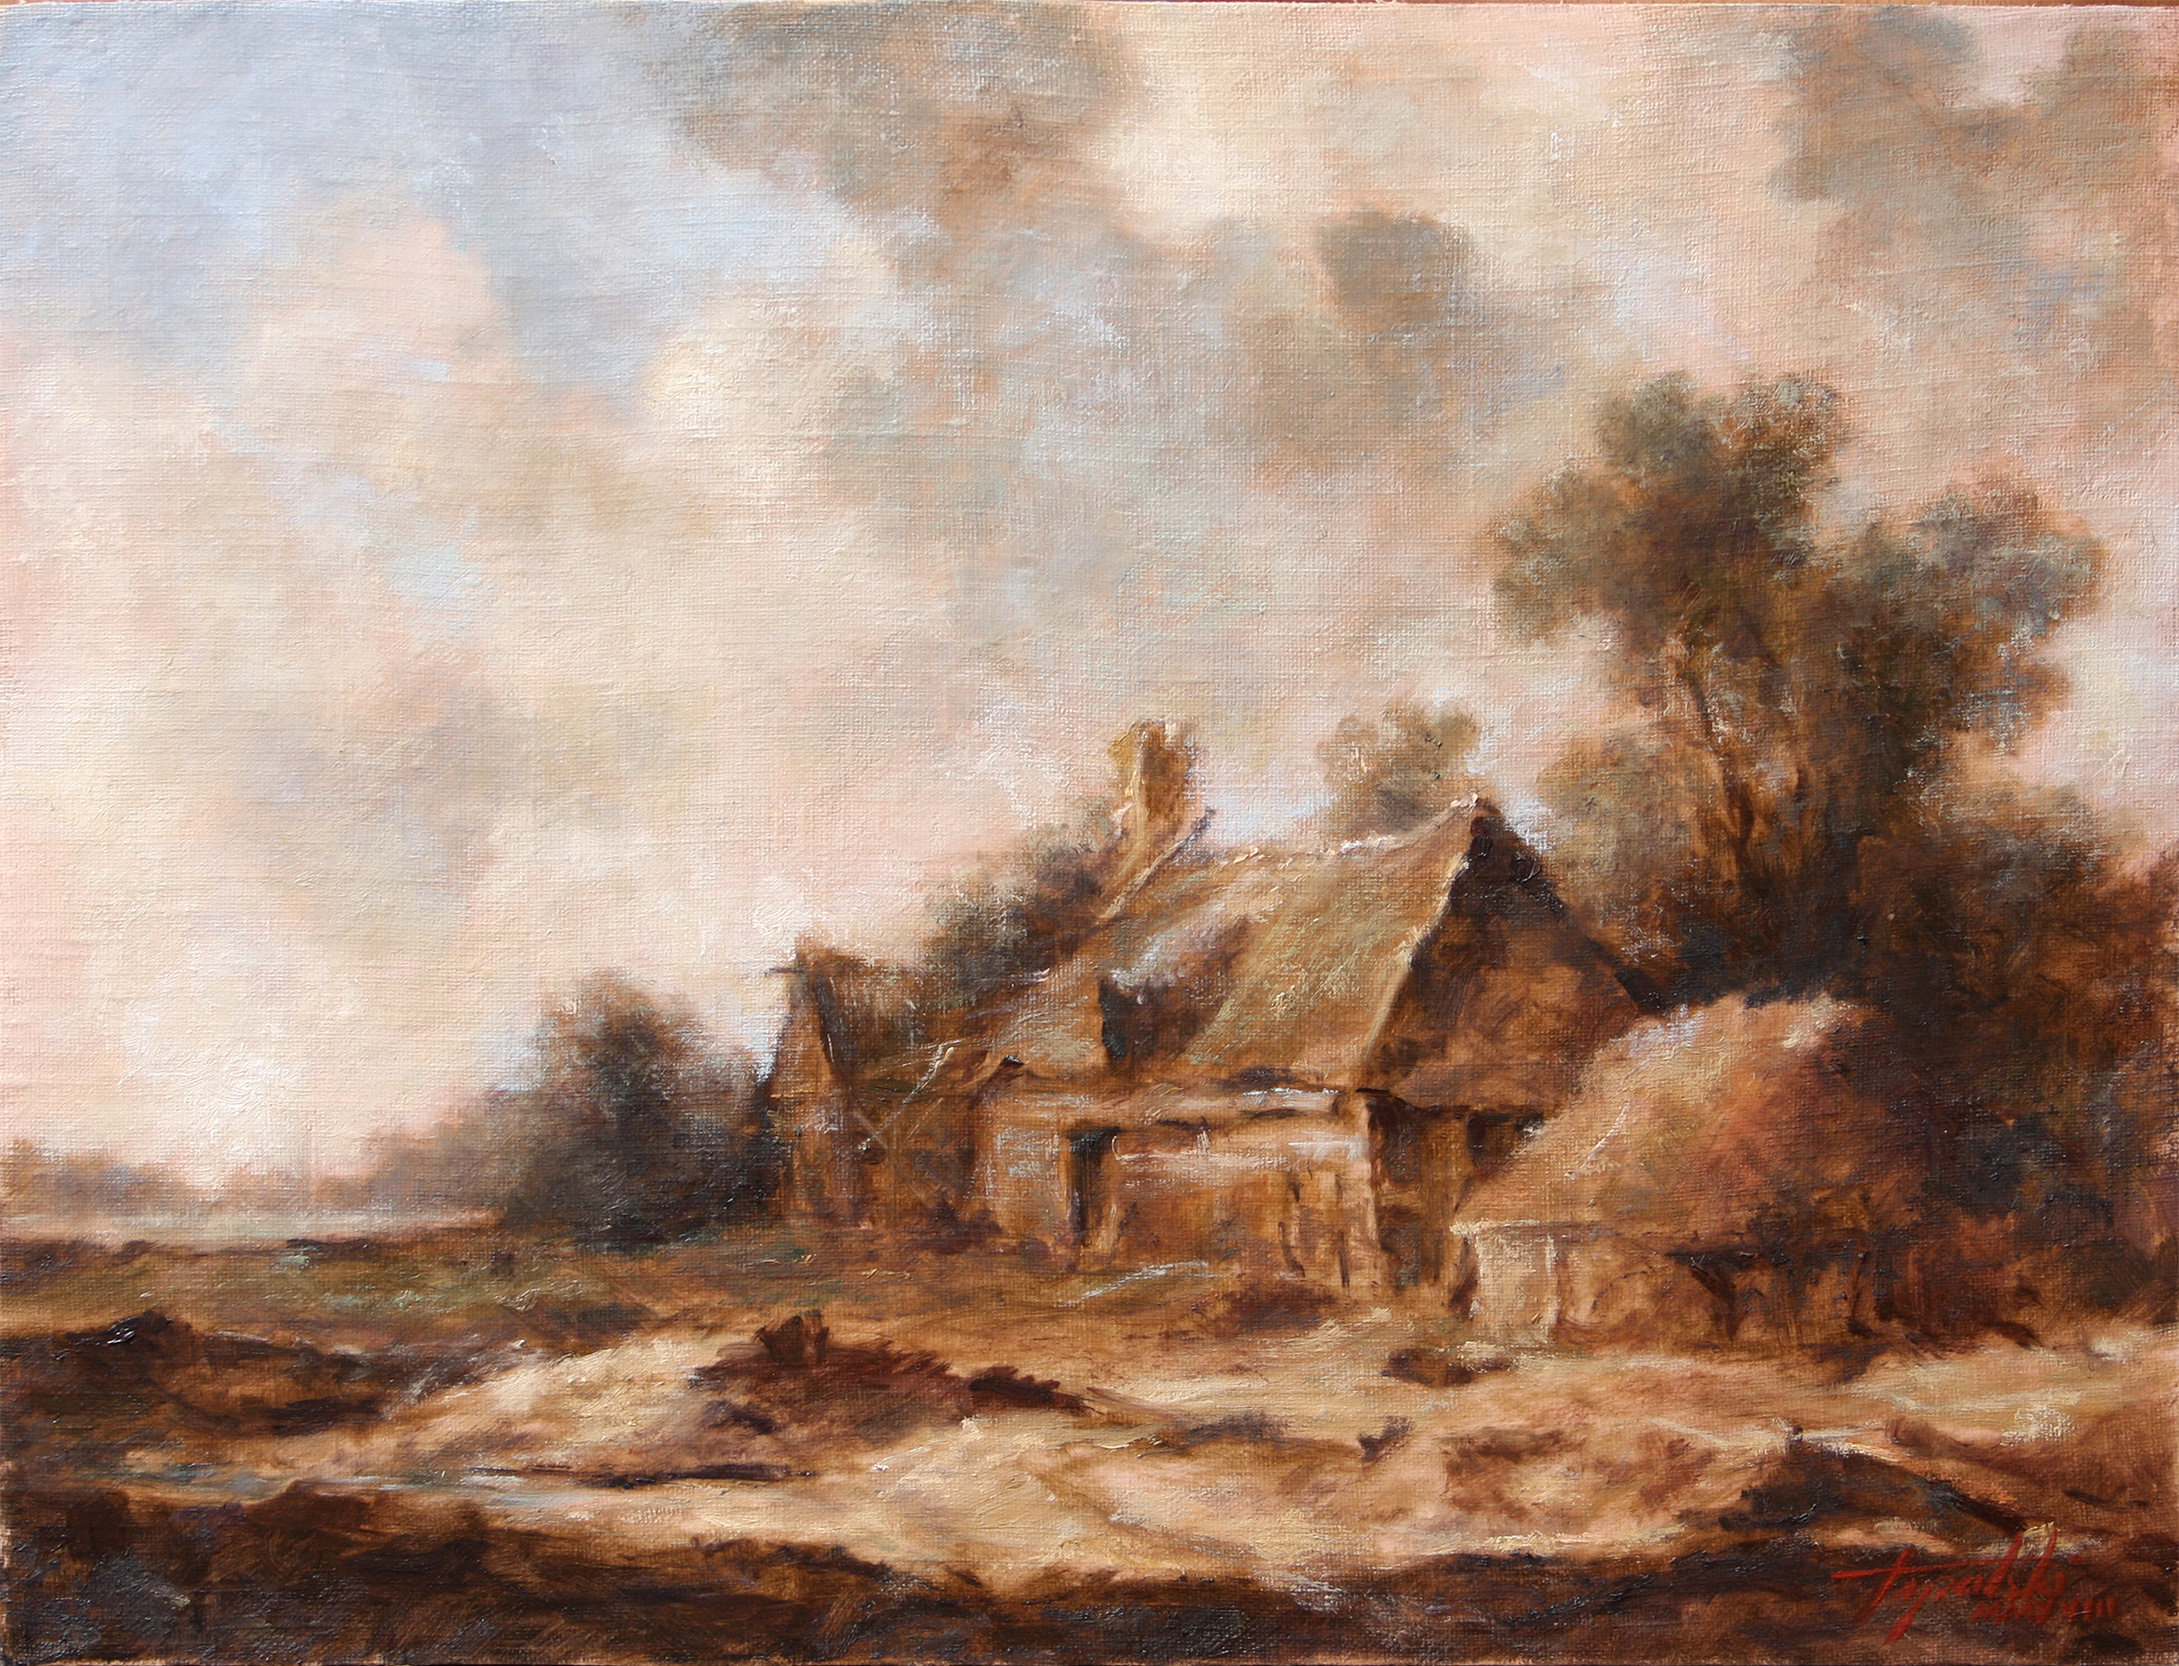 Old Country house – Landscape Oil painting | Fine Arts Gallery ...